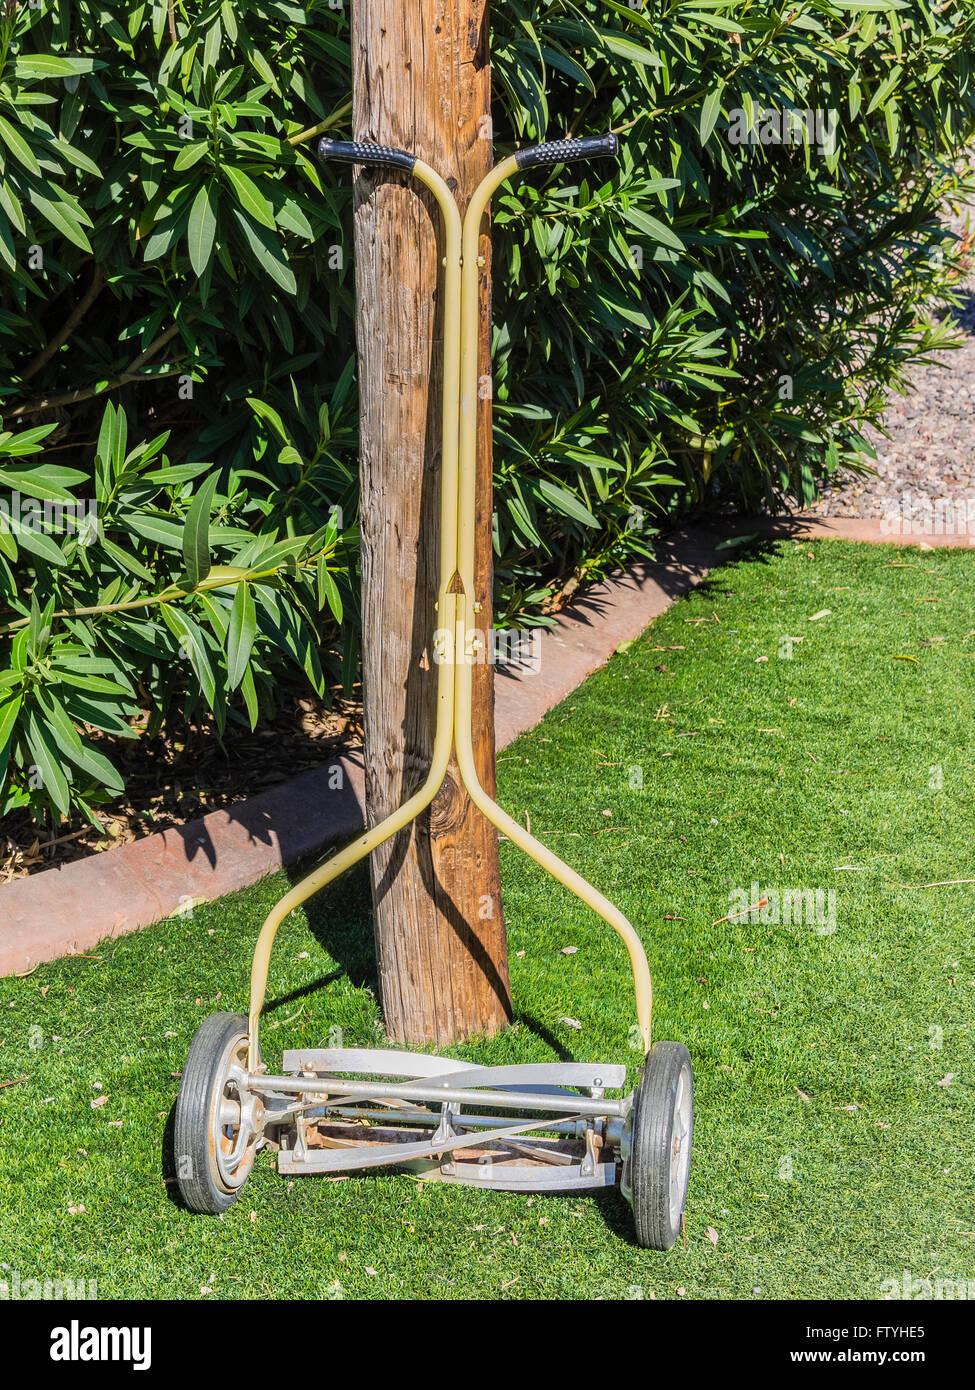 Antique reel type lawn mower leaning against a telephone pole Stock Photo -  Alamy